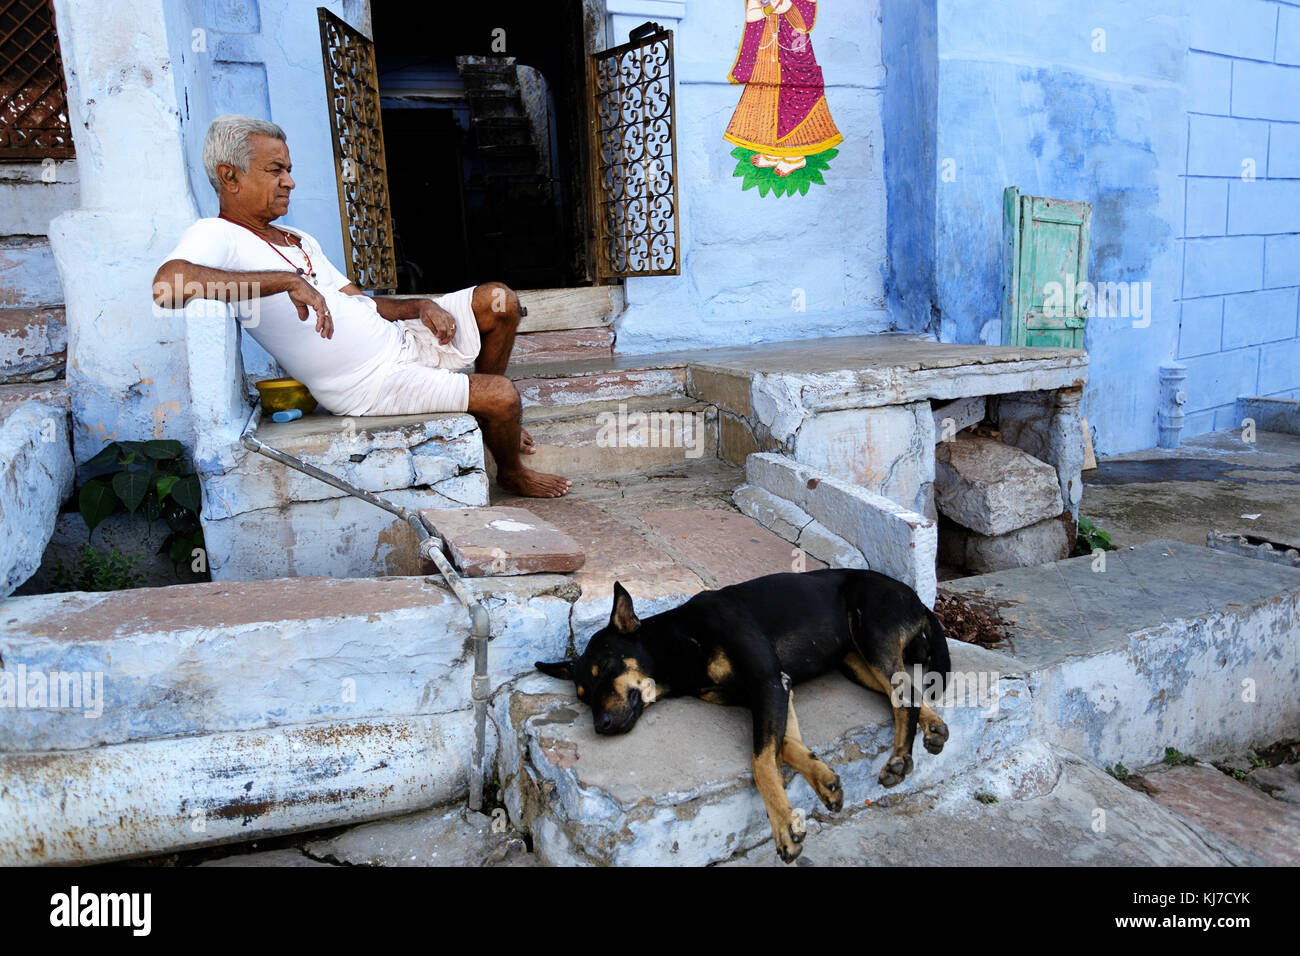 Old indian man dressed in white sitting on the stairs with his dog in front of his house, Jodhpur, Rajasthan, India. Stock Photo